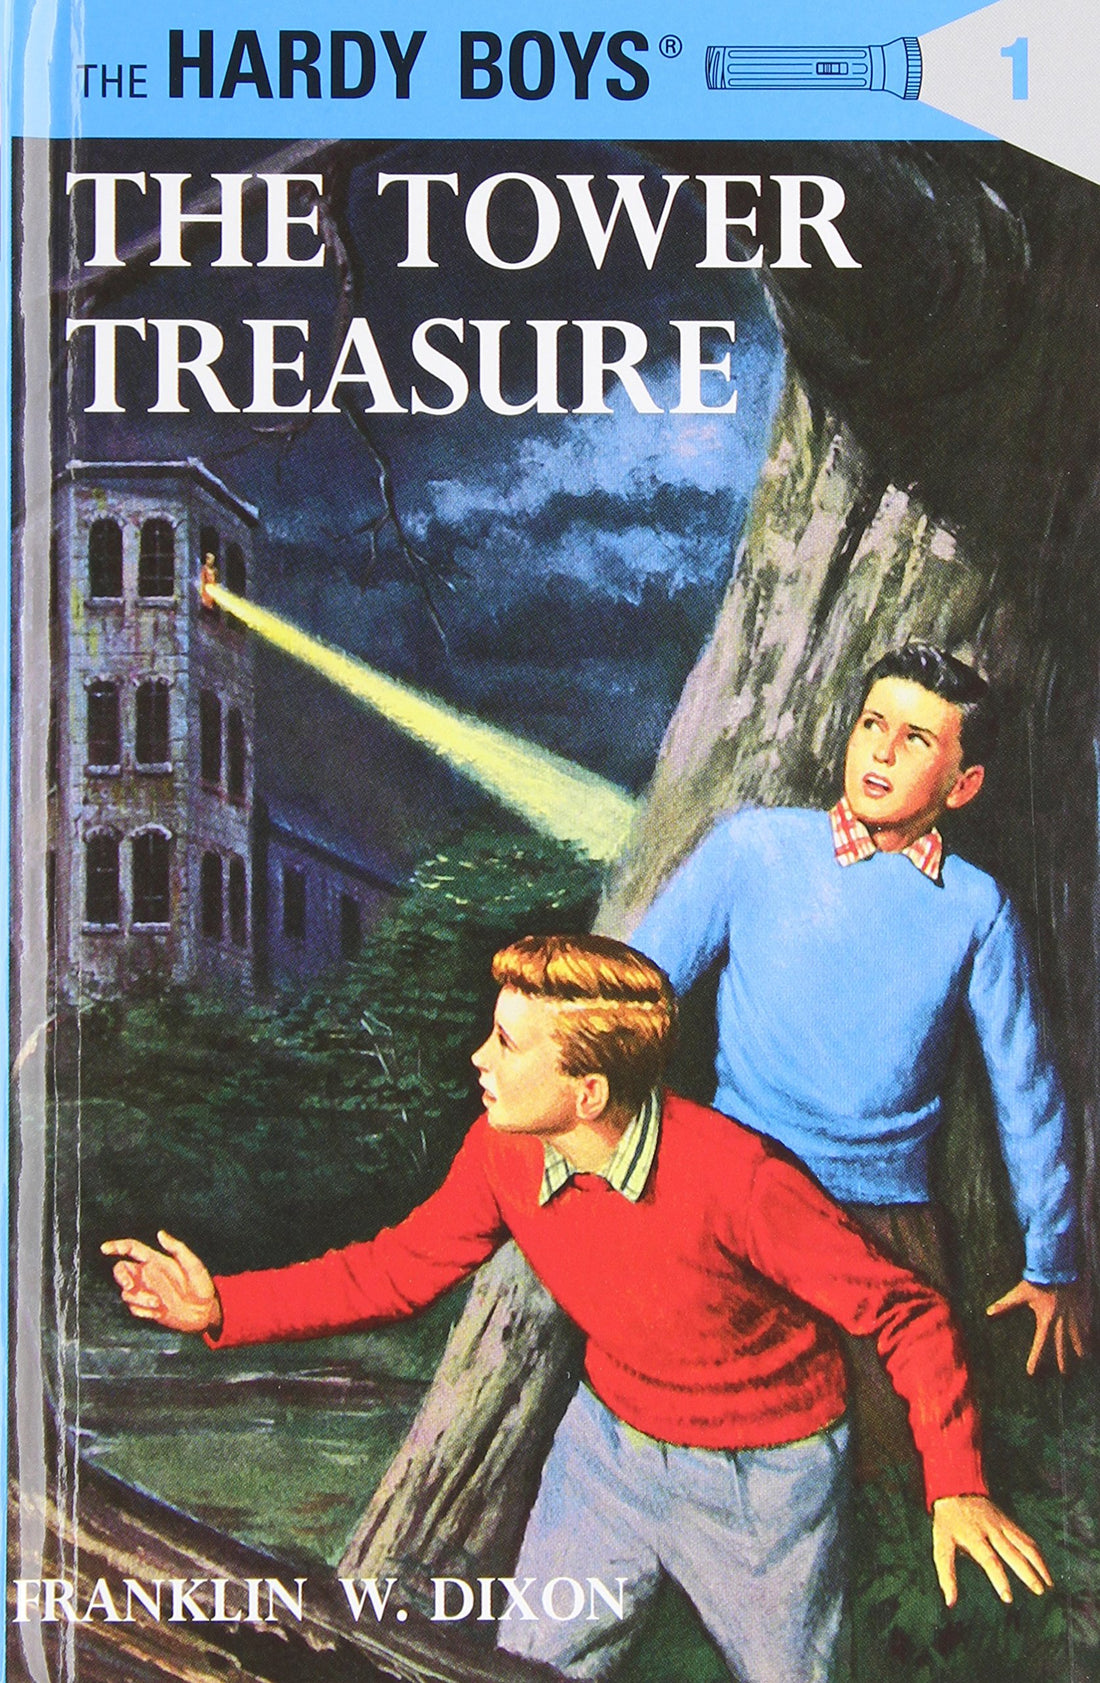 The Hardy Boys by Edward Stratemeyer: A Children’s Book Series Overview